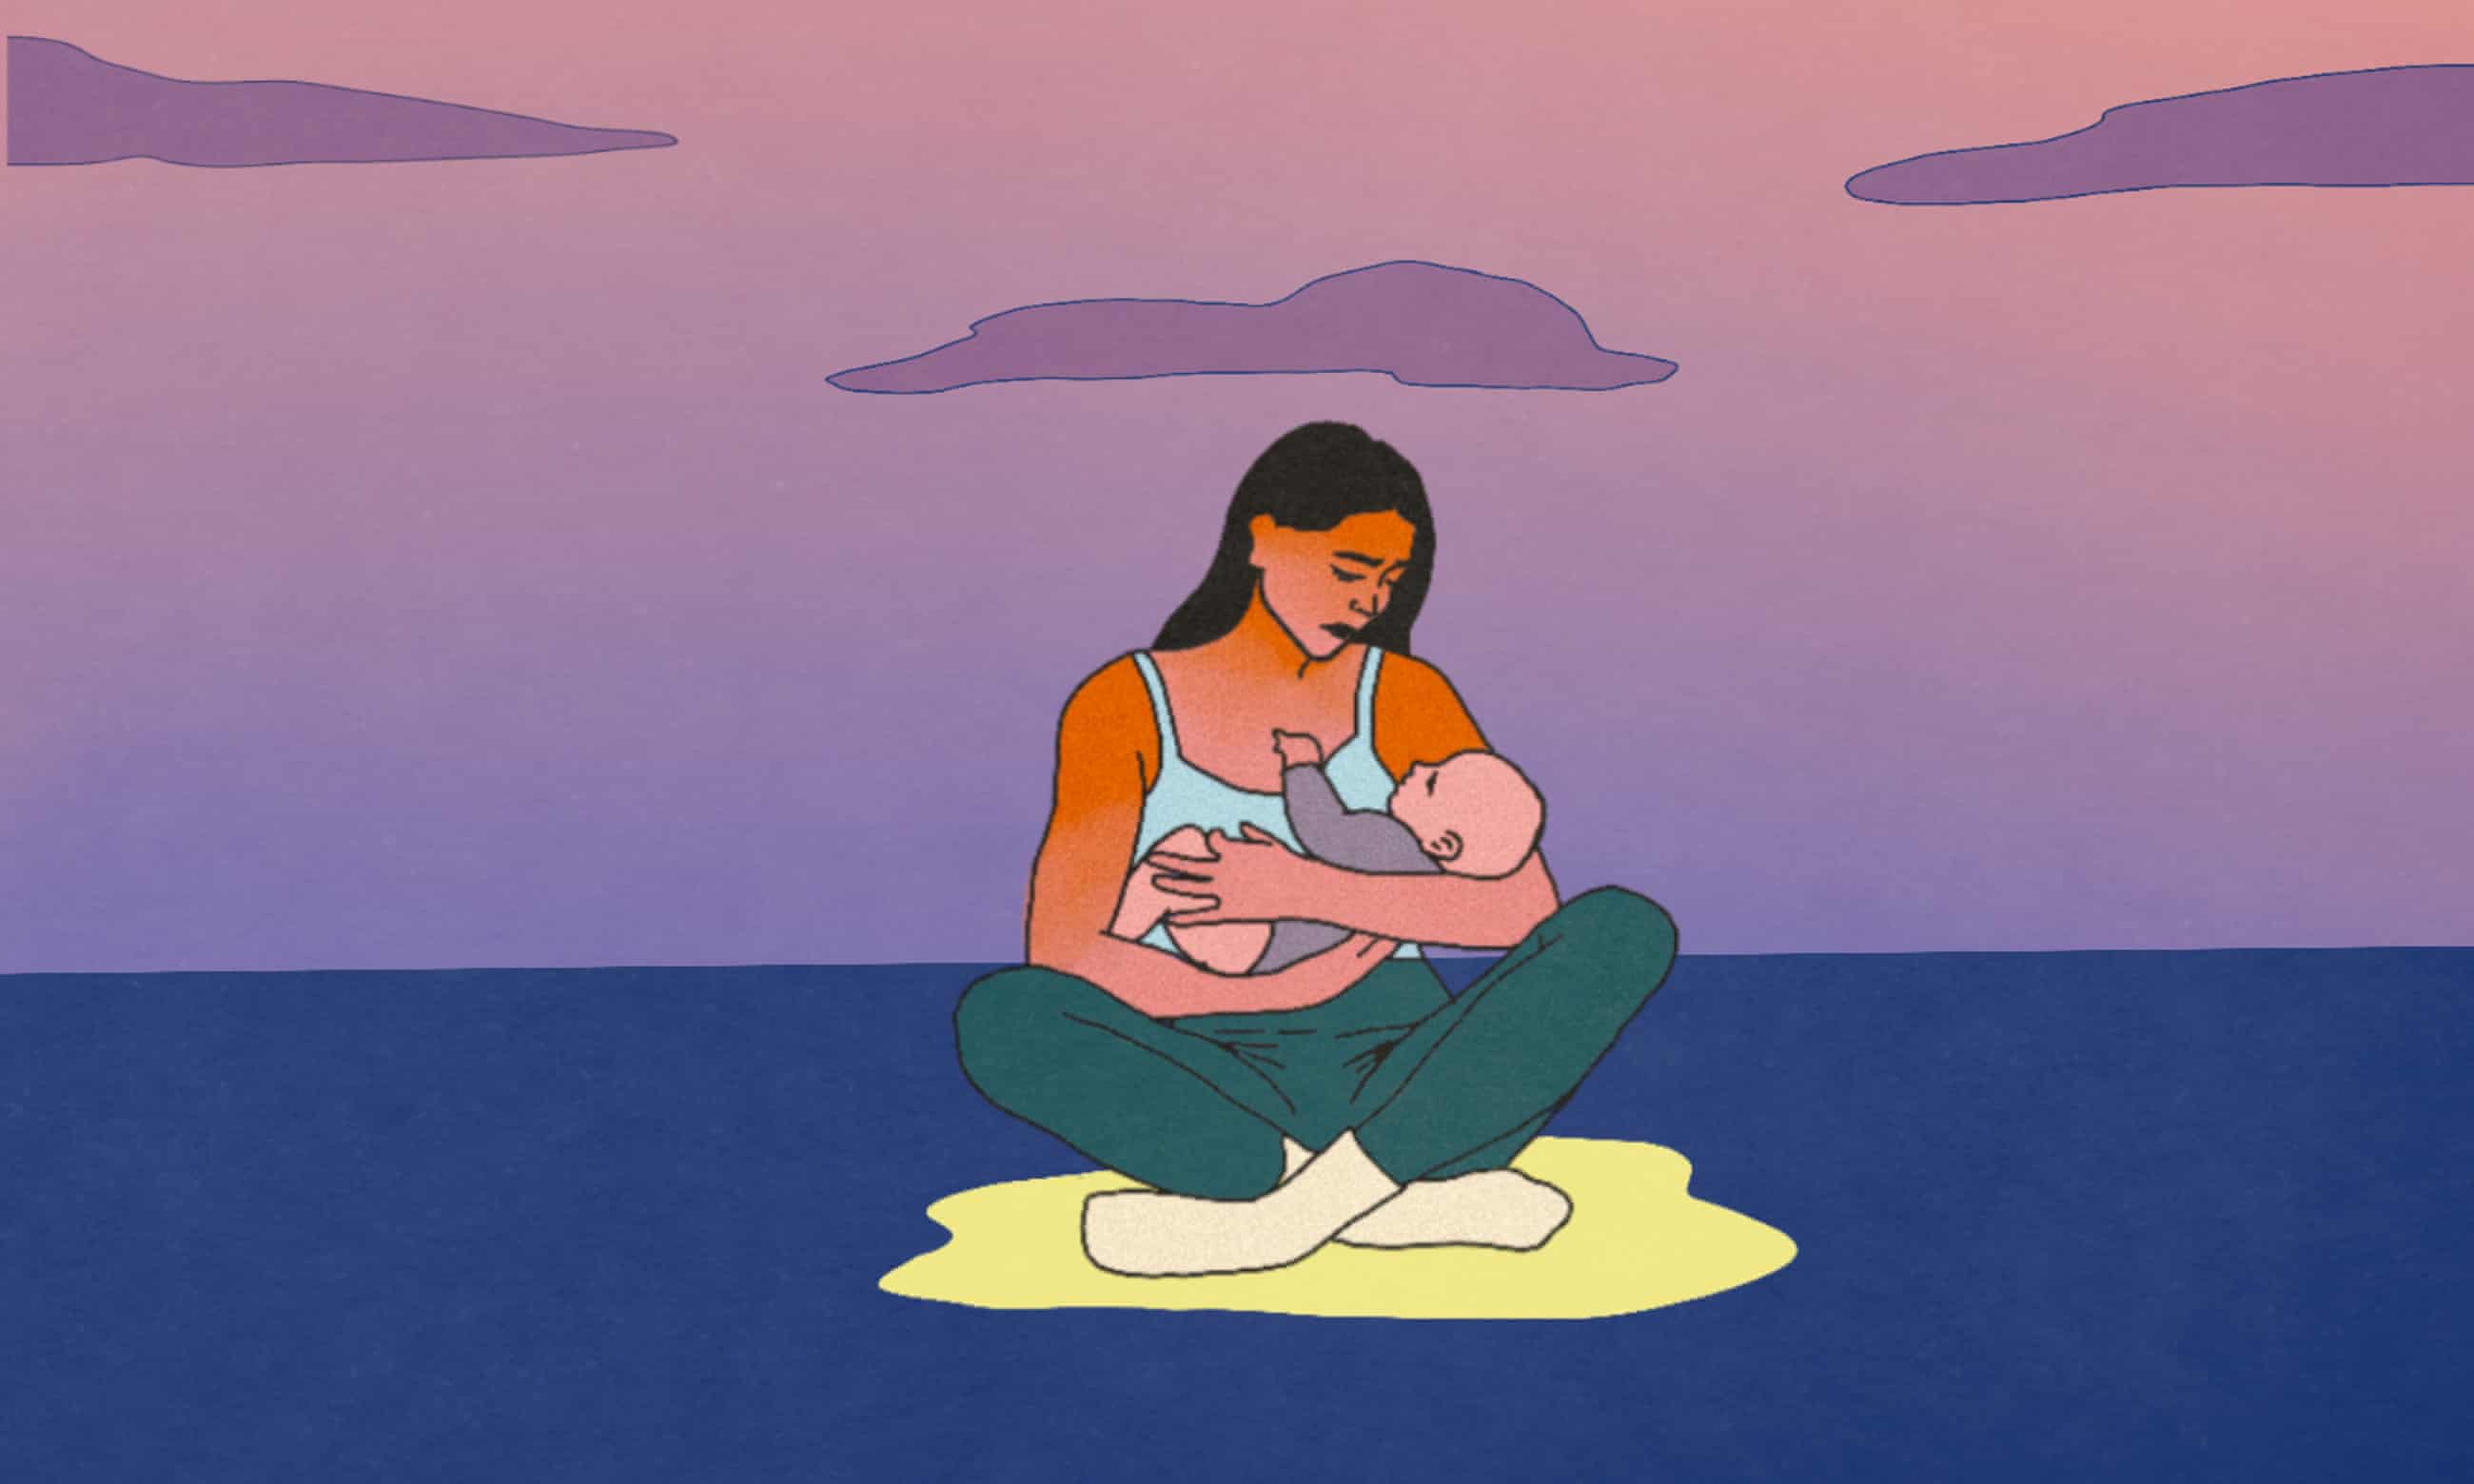 Many women assume psychological struggles after birth are a normal, if difficult, part of new motherhood. Illustration: Rita Liu/The Guardian